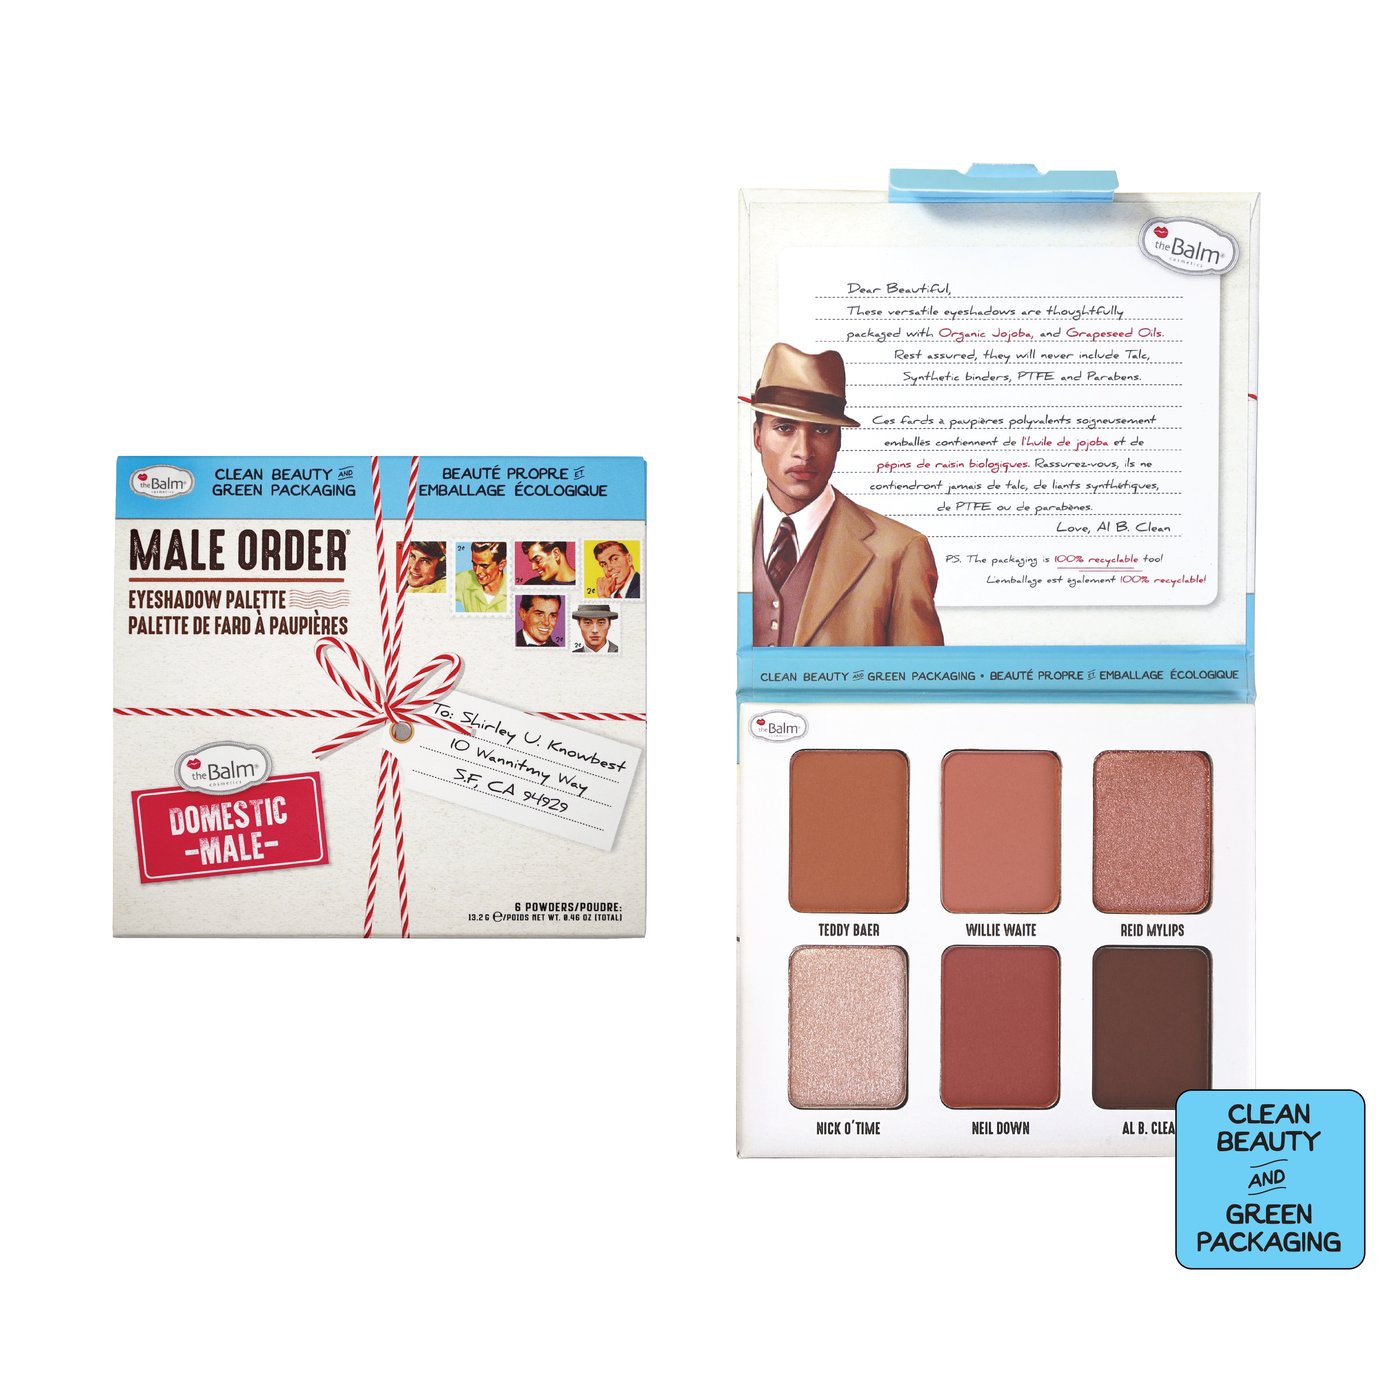 The Balm Male Order Domestic Male Eyeshadow Palette